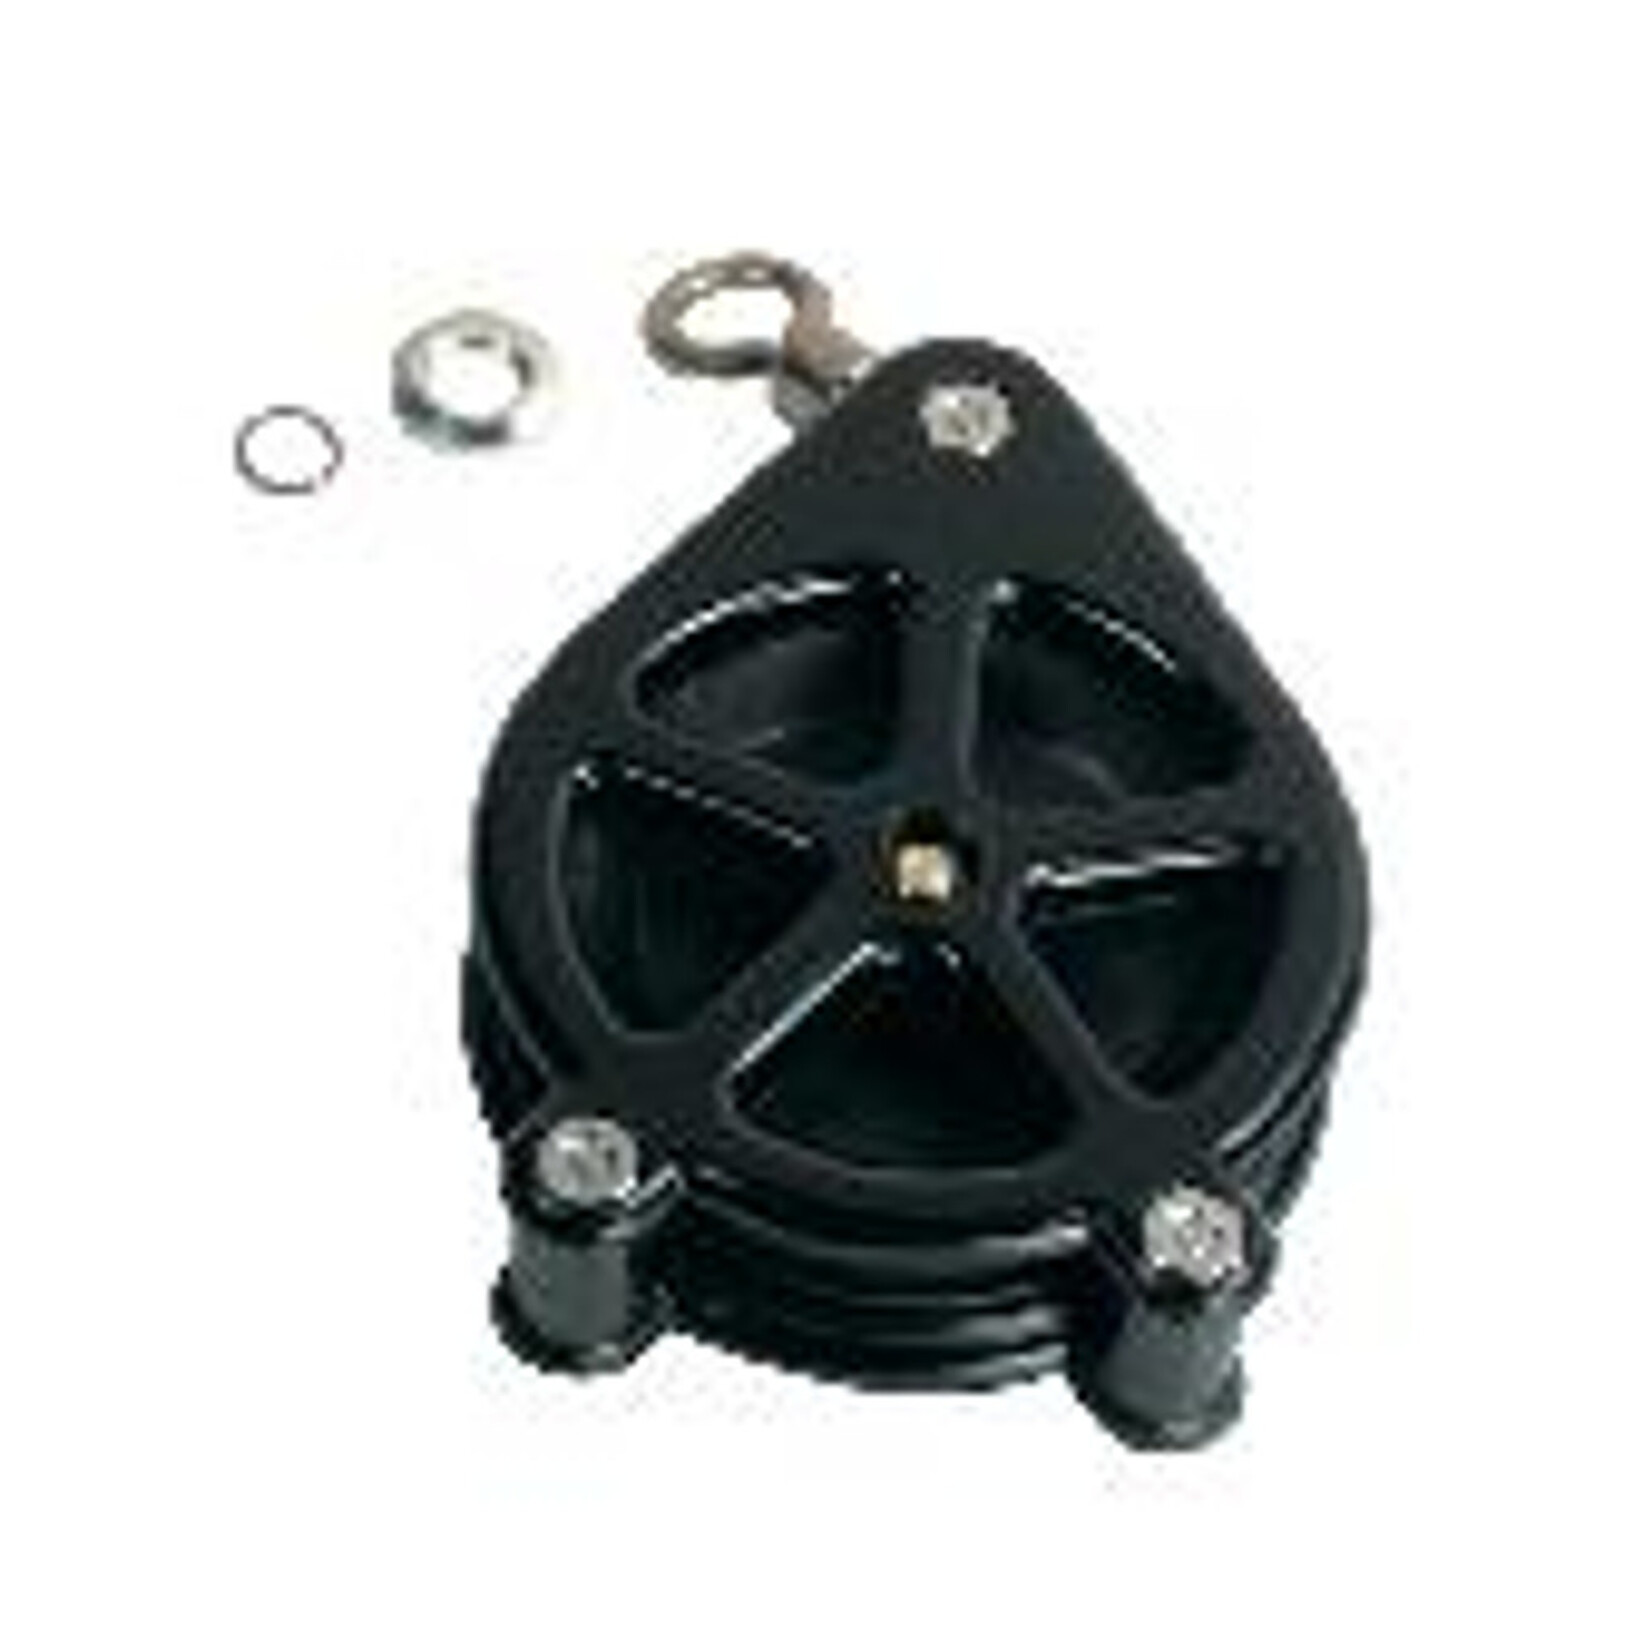 BIG JON END PULLEY W/RETAINERS